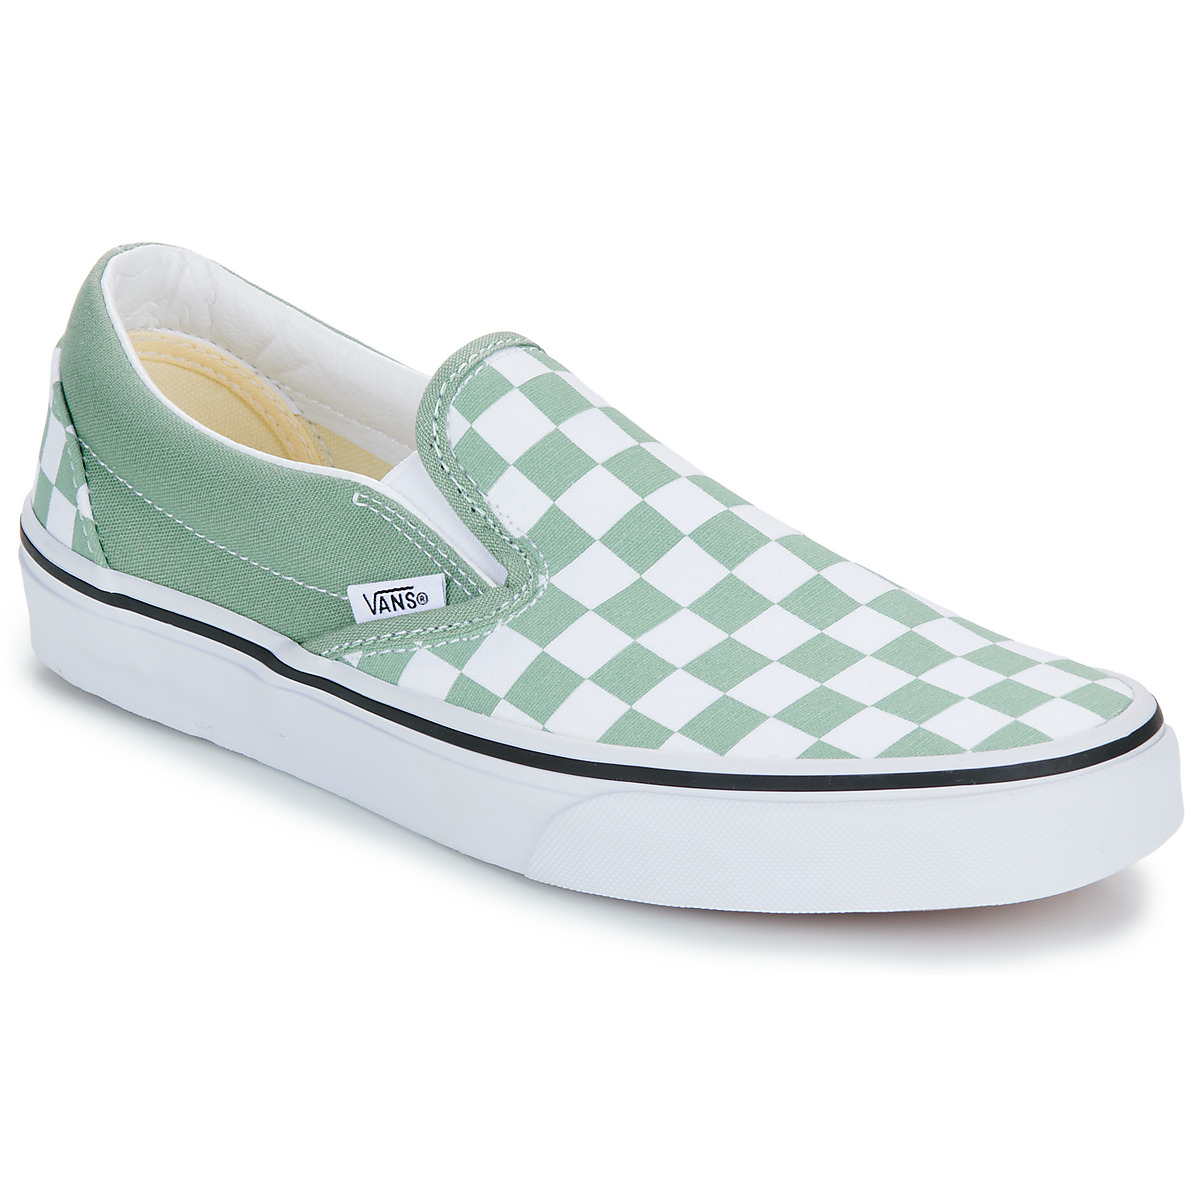 Vans Classic Slip-on Color Theory Checkerboard Iceberg Green Green